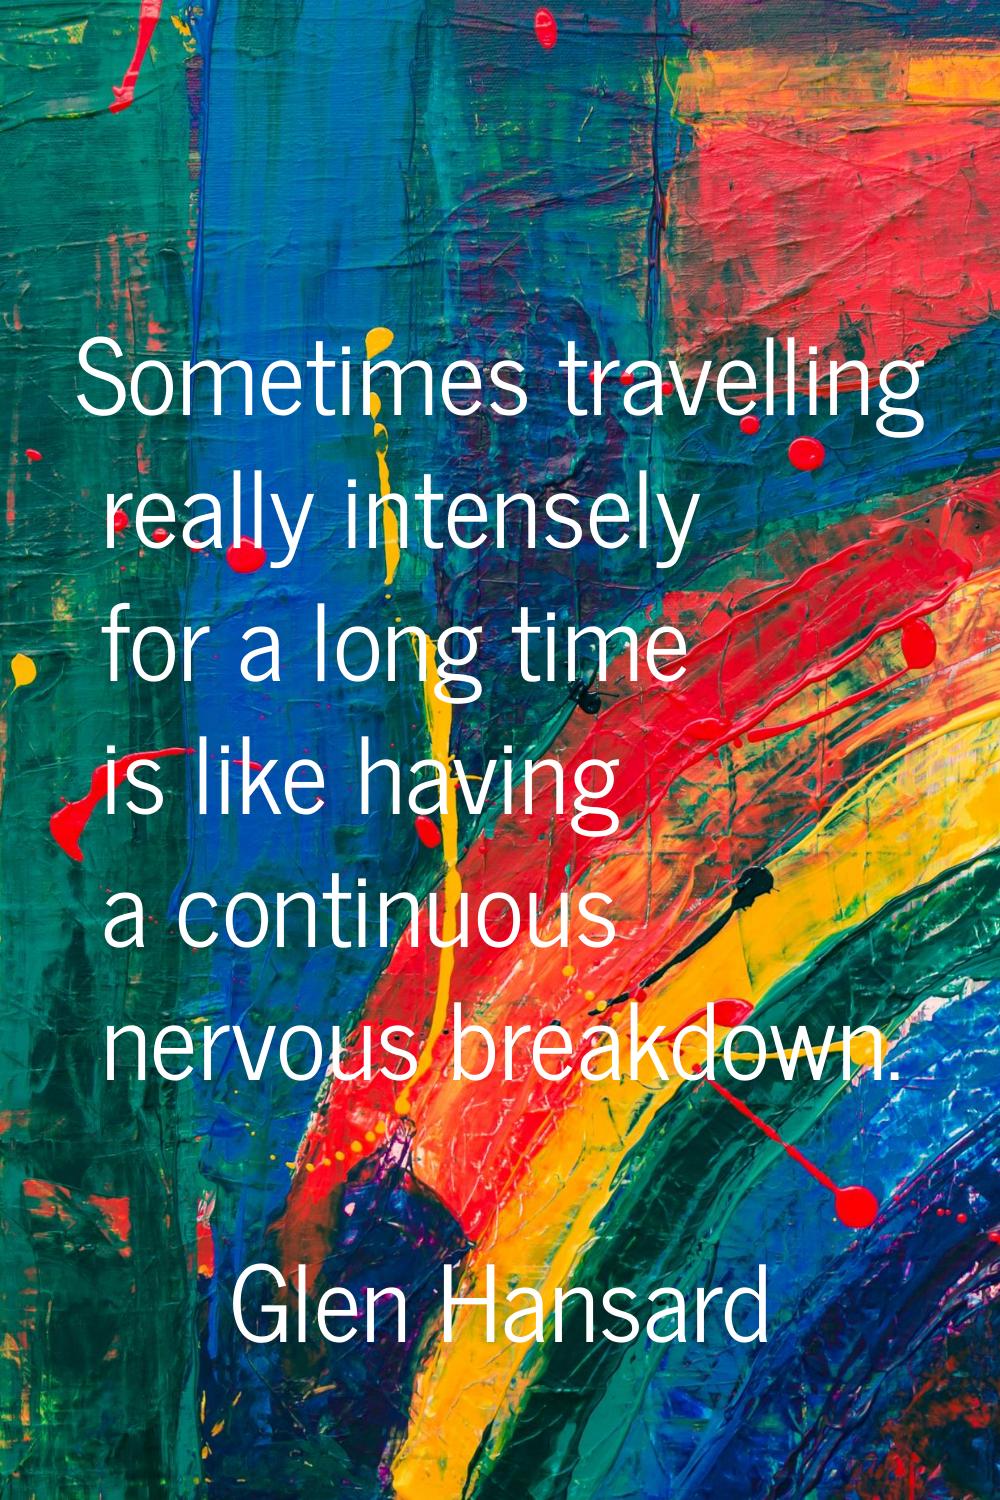 Sometimes travelling really intensely for a long time is like having a continuous nervous breakdown